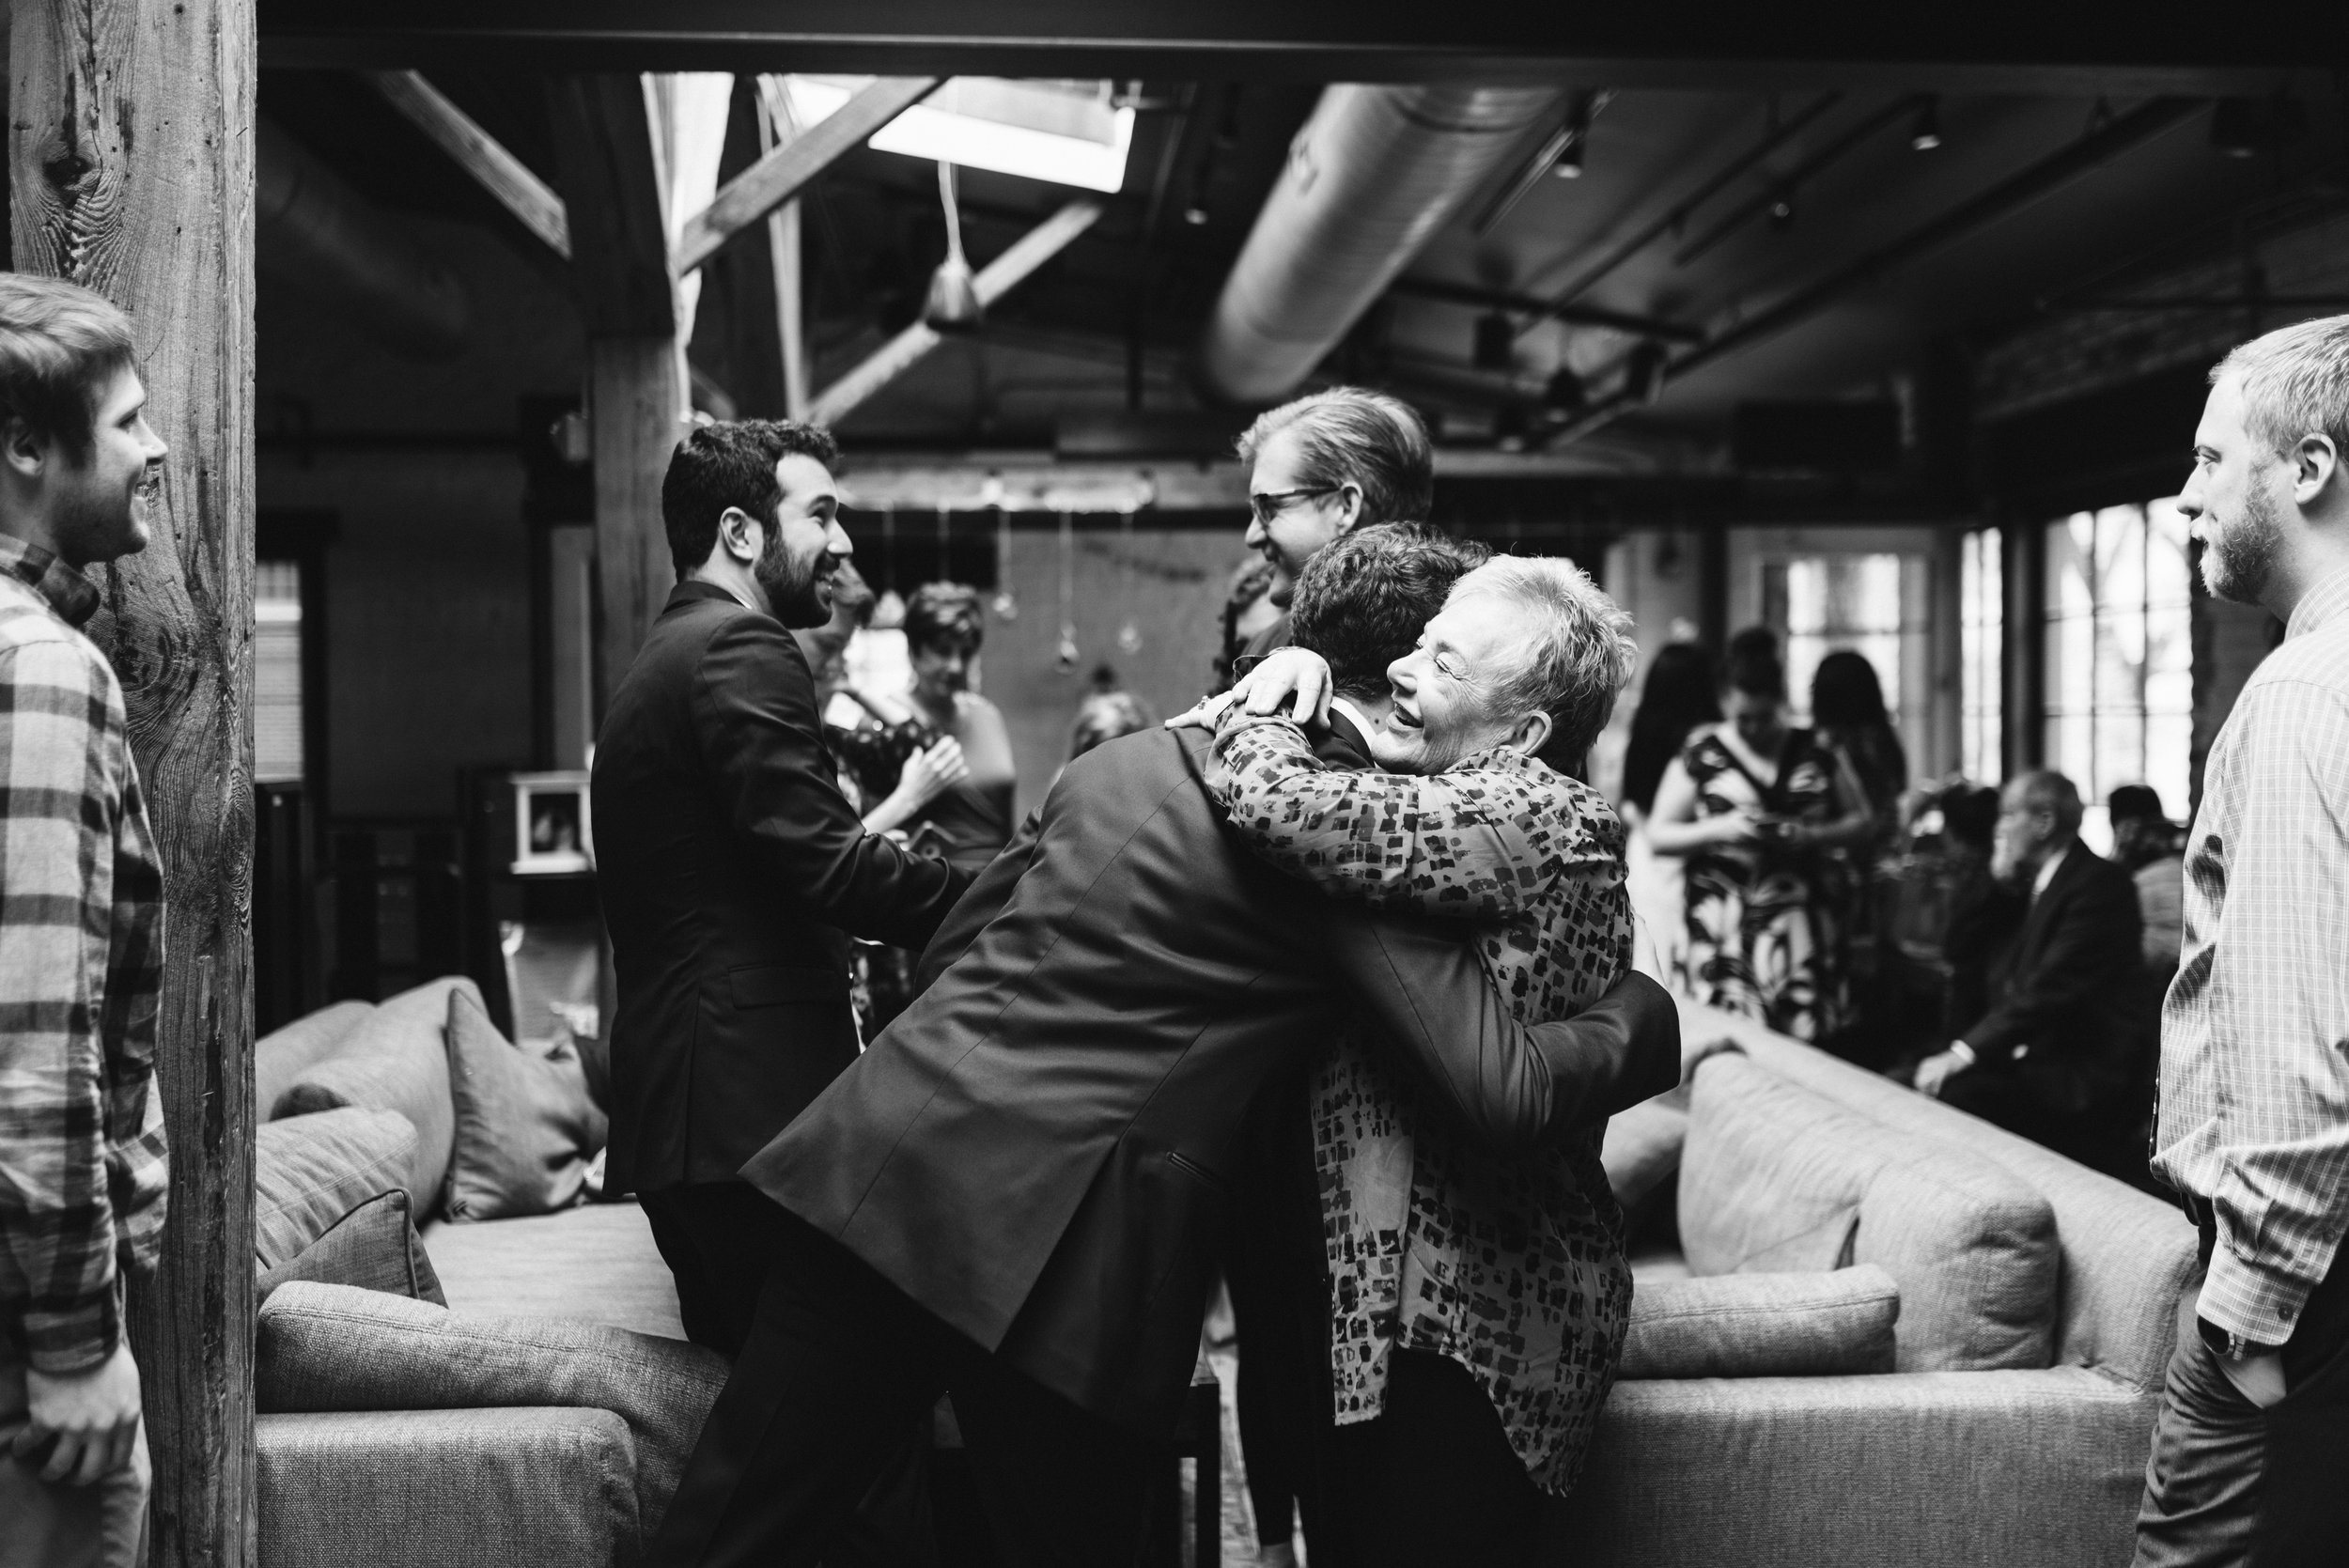  Washington DC, Baltimore Wedding Photographer, Alexandria, Old Town, Jewel Tone, Romantic, Modern, Virtue Feed &amp; Grain, Guests Smiling and Hugging, Black and White Candid Photo 